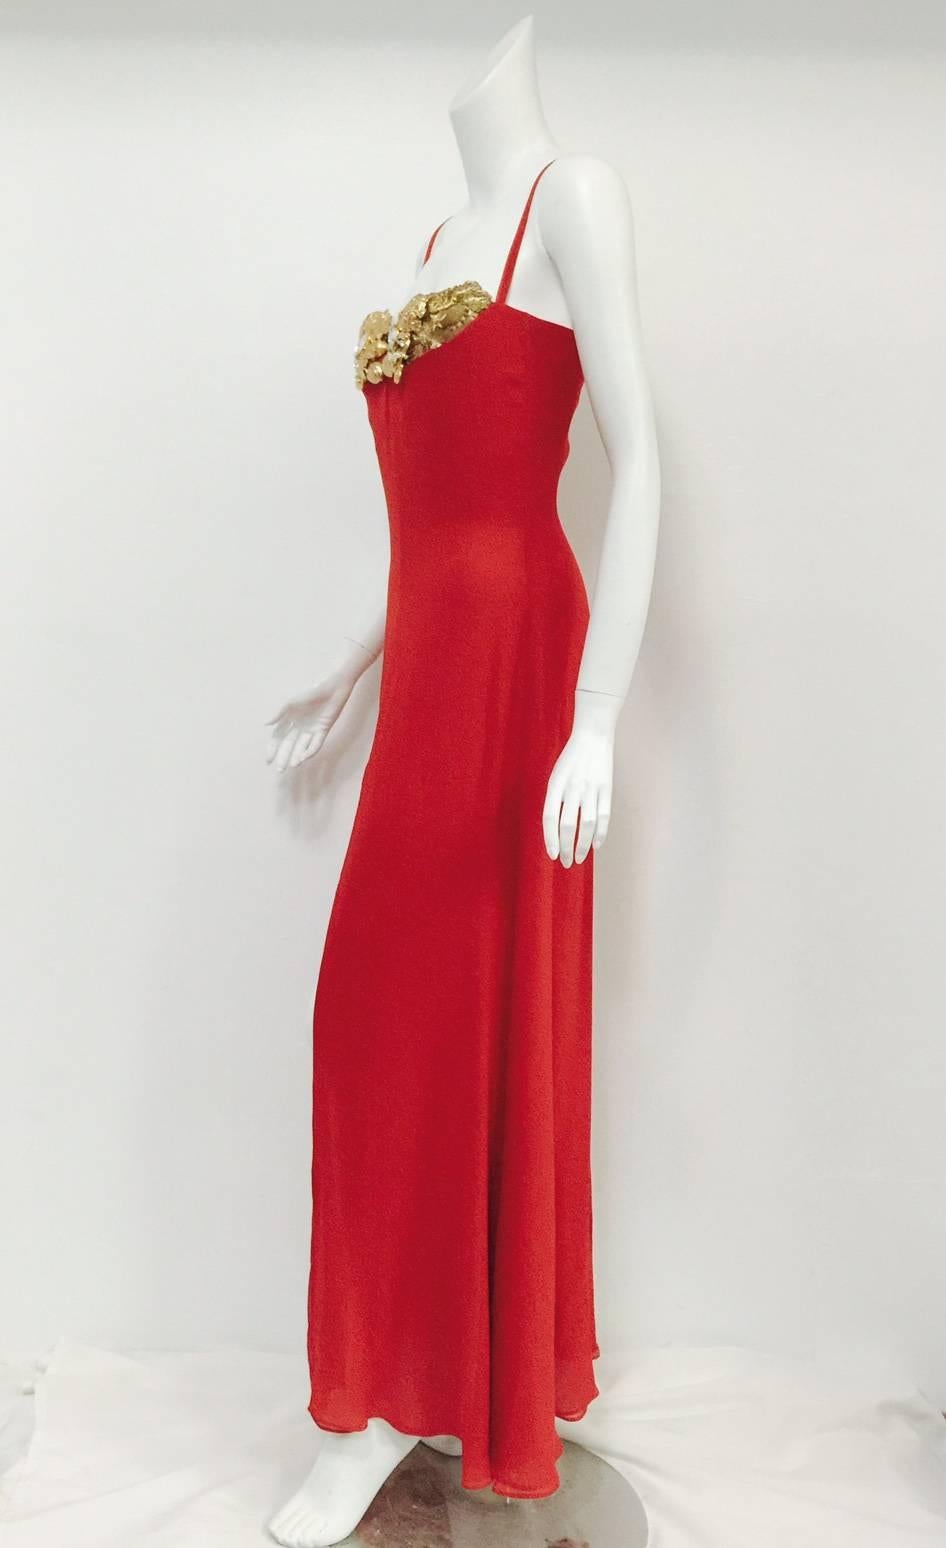 Ravishing Red Silk Evening Dress shows why Gianfranco Ferre was chosen  to design for Christian Dior Haute Couture in the early 1990s!   Features layers of exquisite silk, spaghetti straps, corset, and boning. Full skirt is enhanced with a seductive